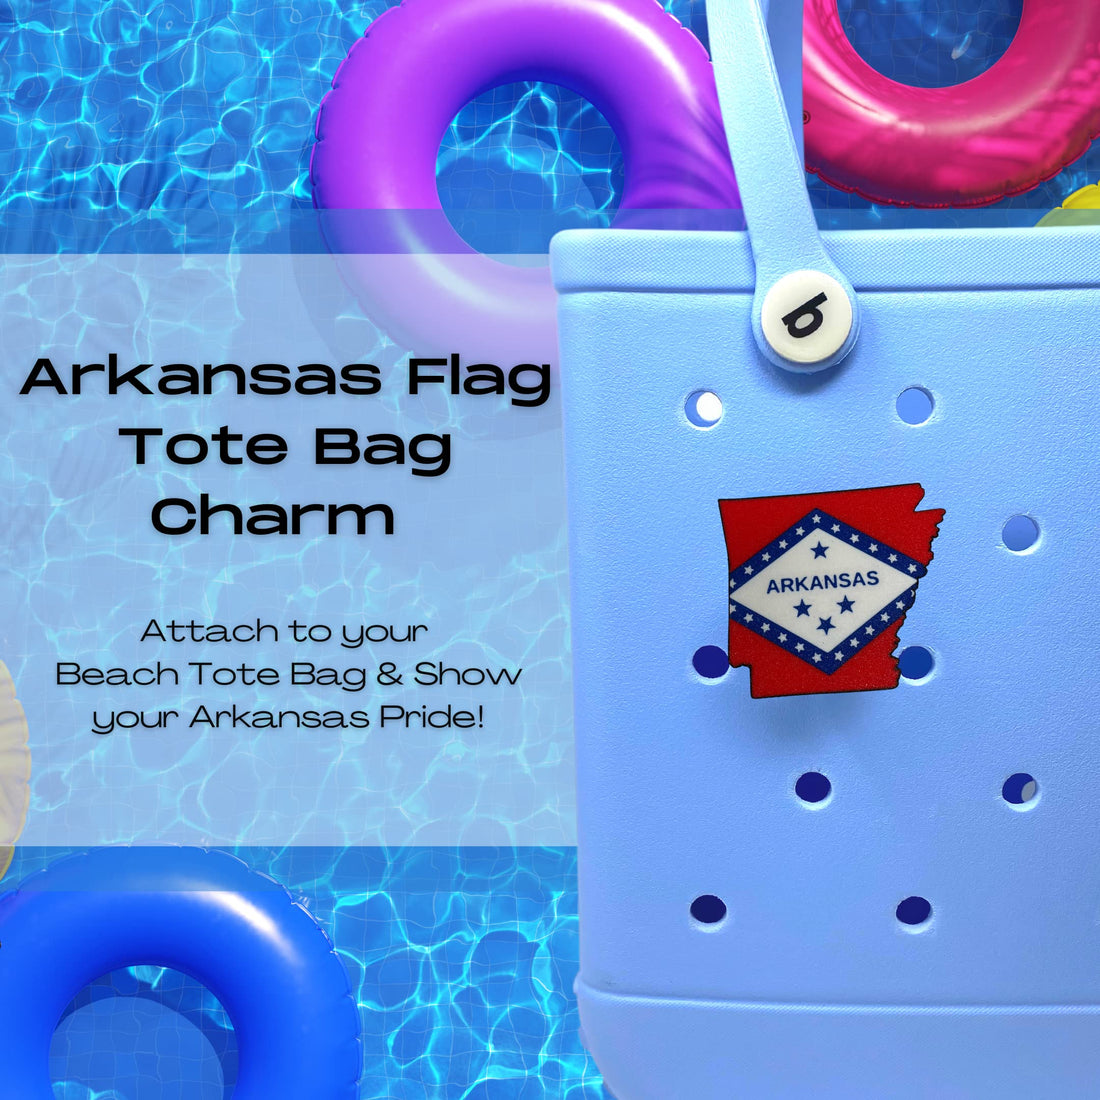 Boglets - USA Flag Charms - Decorative Charms for Displaying Patriotism - Compatible with Bogg Bags, Simply Southern and other Tote Bags